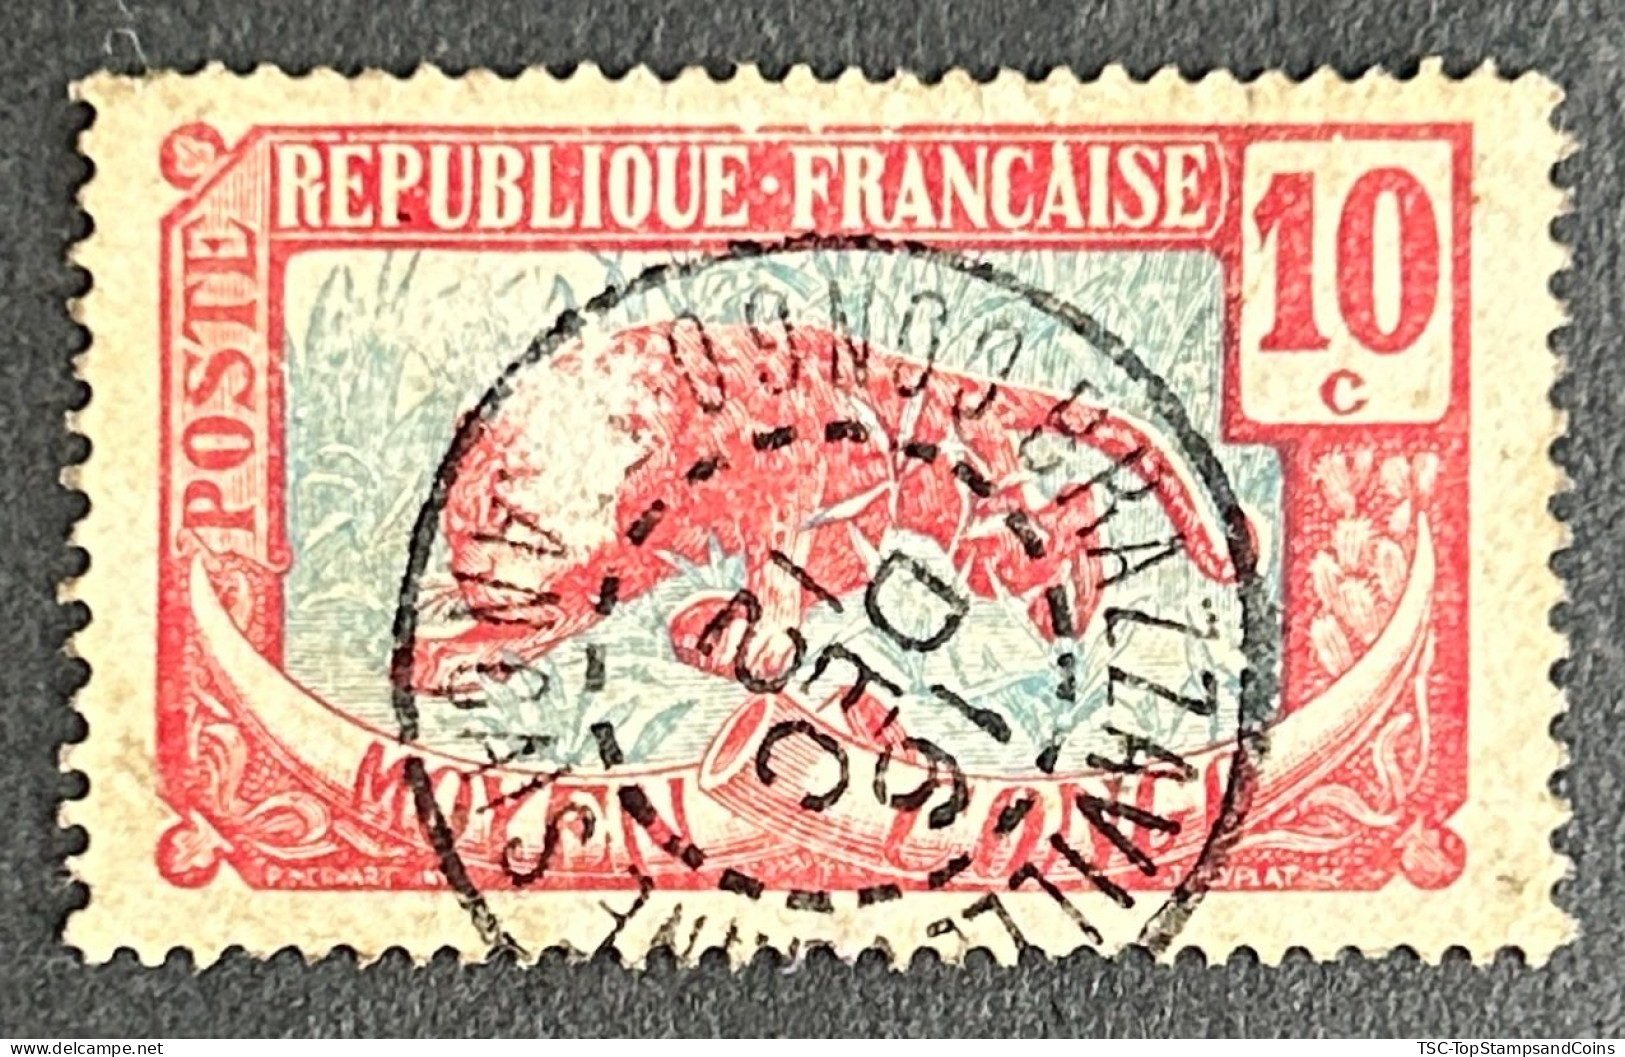 FRCG052U8 - Leopard - 10 C Used Stamp - Middle Congo - 1907 - Used Stamps